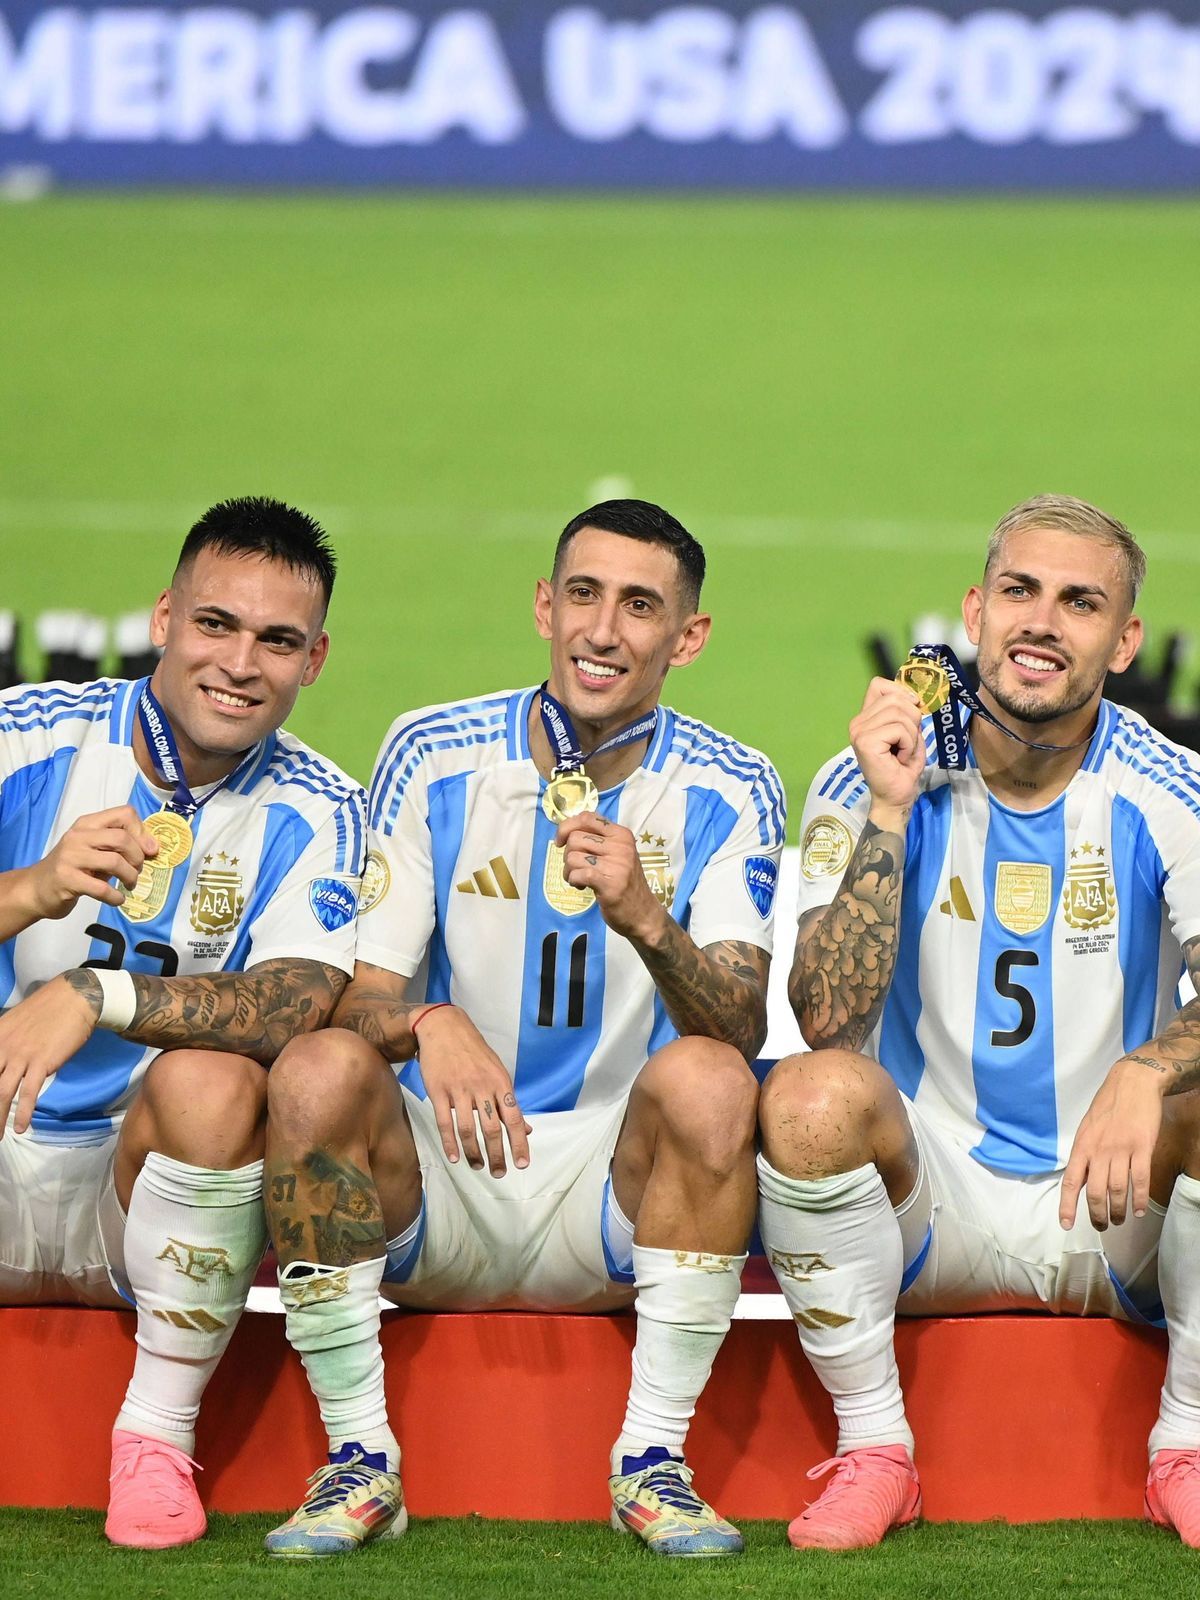 14th July 2024: Miami Gardens, Florida, USA: Copa America Finals match between Colombia and Argentina at Hard Rock Stadium in Miami Gardens, Florida, USA; Nicol& xe1;s Otamendi, Lautaro Mart& xed;n...